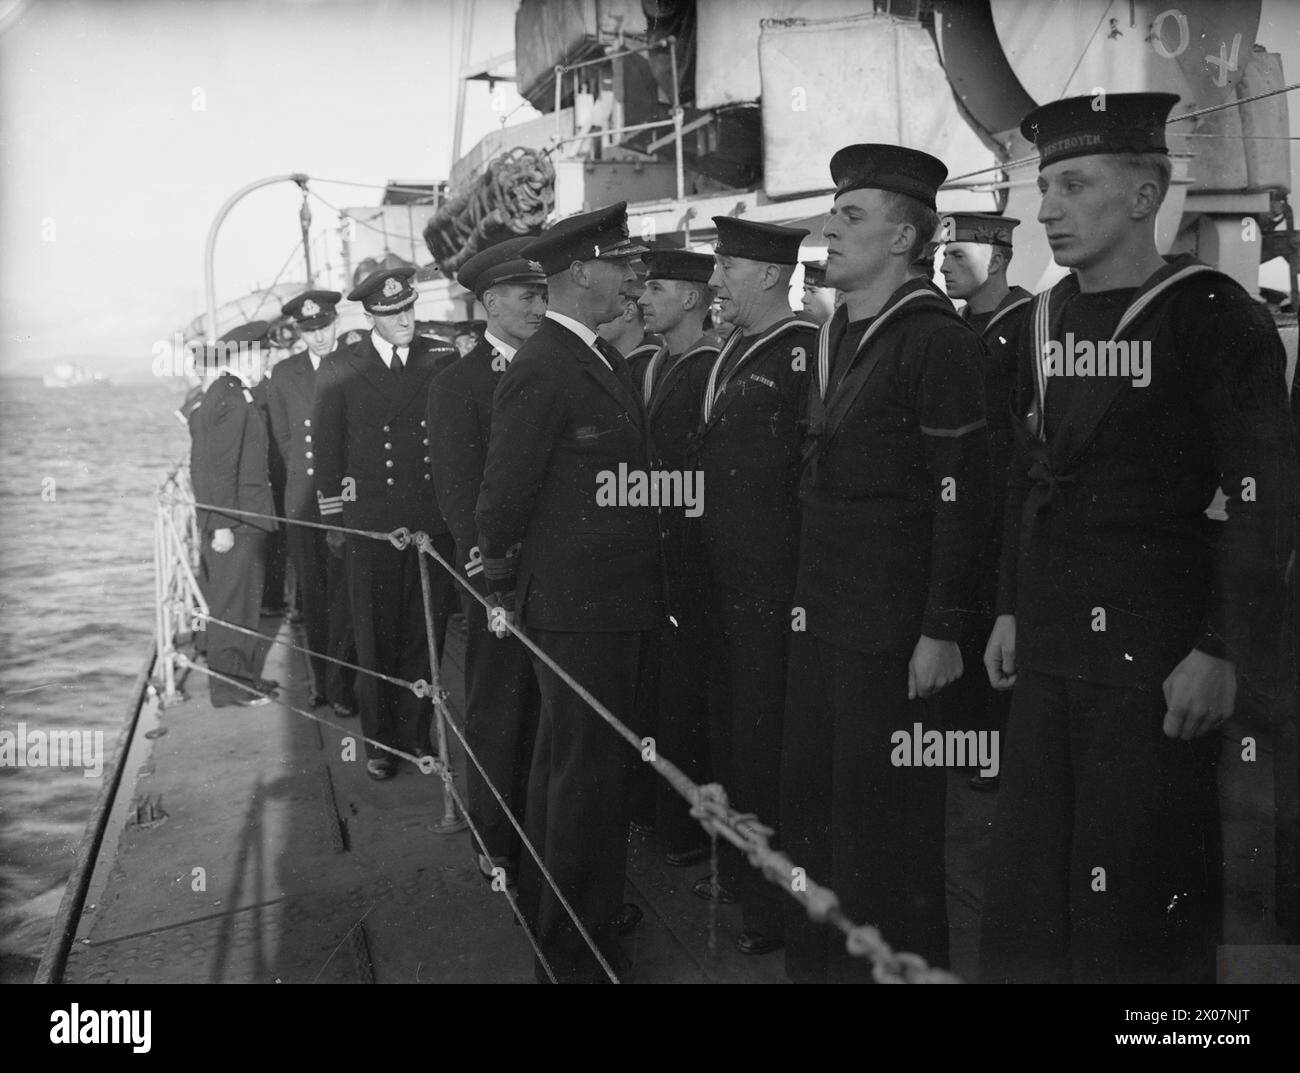 PREPARATIONS FOR NORWEGIAN OPERATIONS. OCTOBER 1941, ON BOARD THE DESTROYER HMS BEDOUIN. HMS VICTORIOUS AND HMS KING GEORGE V ALONG WITH ESCORTING DESTROYERS DURING SEVERAL DAYS OF PREPARATION FOR NORWEGIAN OPERATIONS. - Captain D6, Captain Donald Keppel Bain, RN, inspecting crew on board the destroyer HMS BEDOUIN Stock Photo